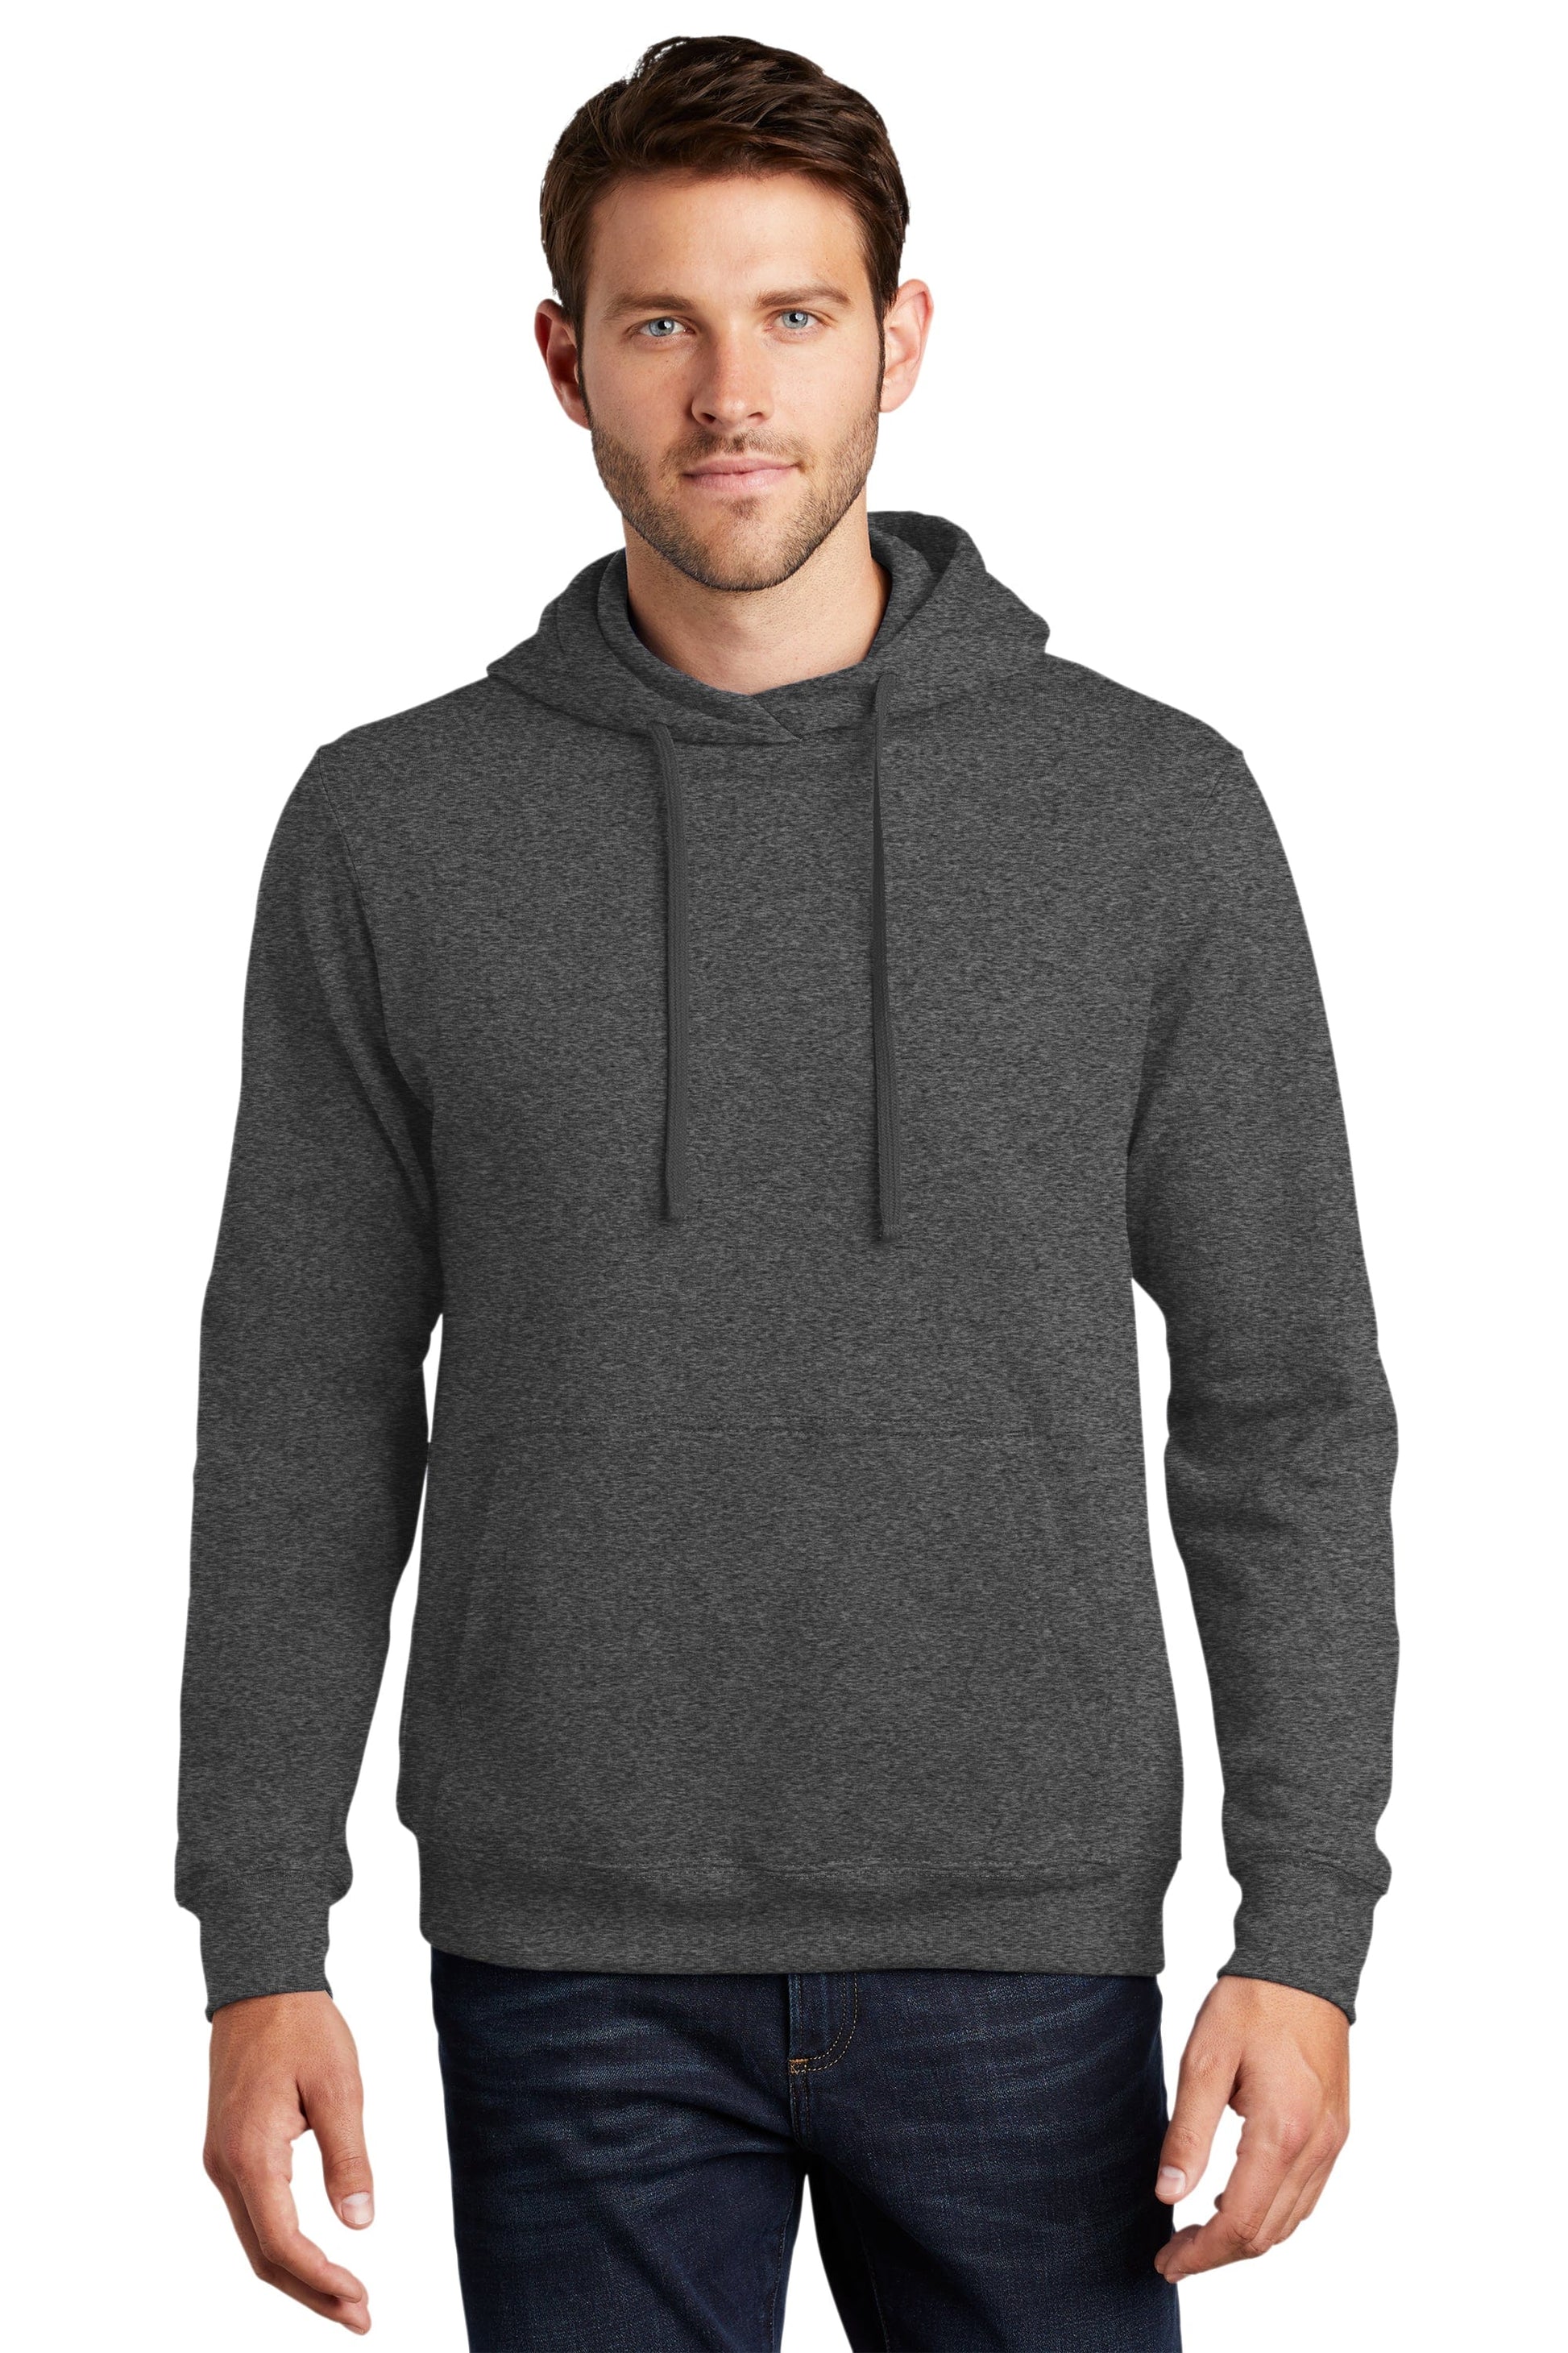 FORtheFIT mens-tall-jacket NEW Tall Men's Premium Fleece Hoodie - 2 Colors Available